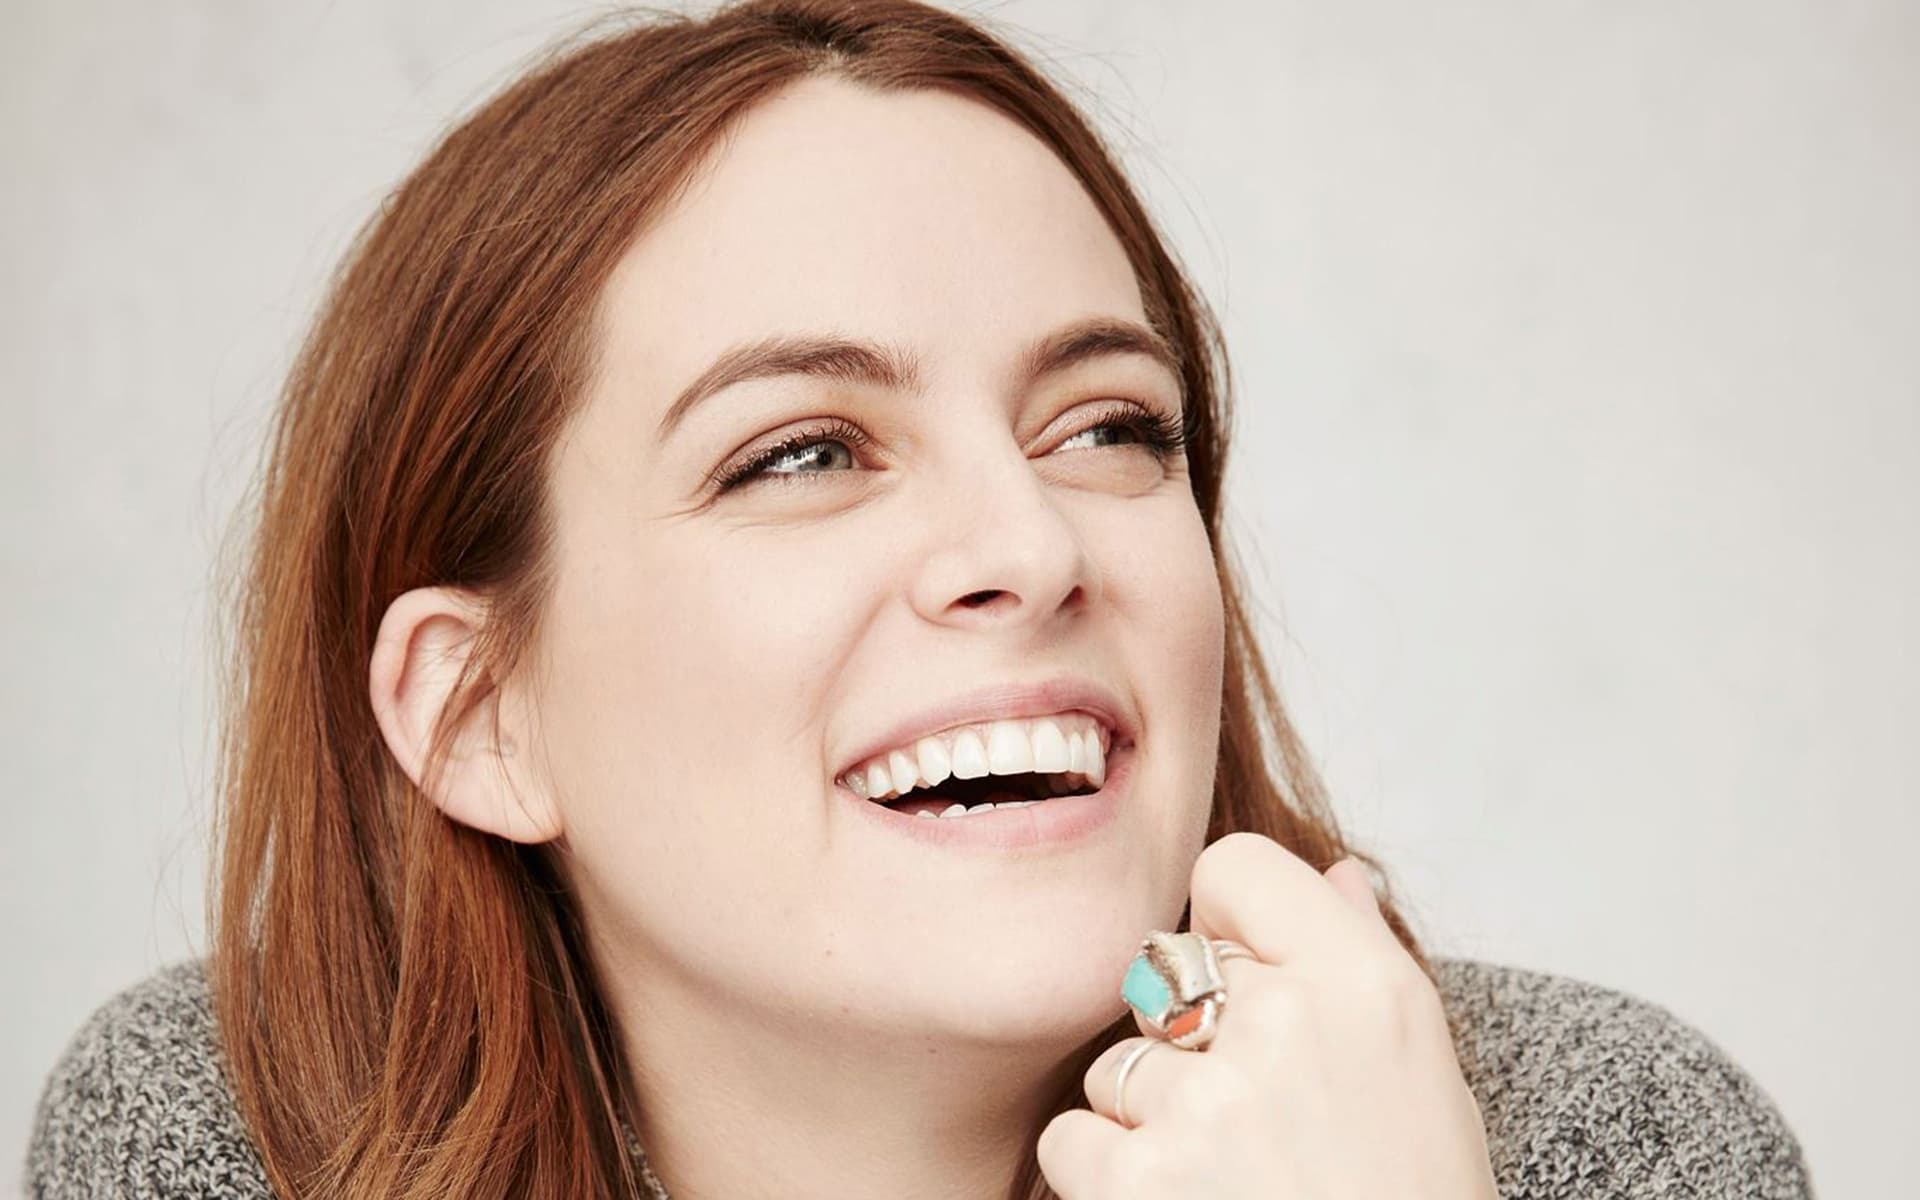 celebrity, riley keough, actress, face, redhead, smile